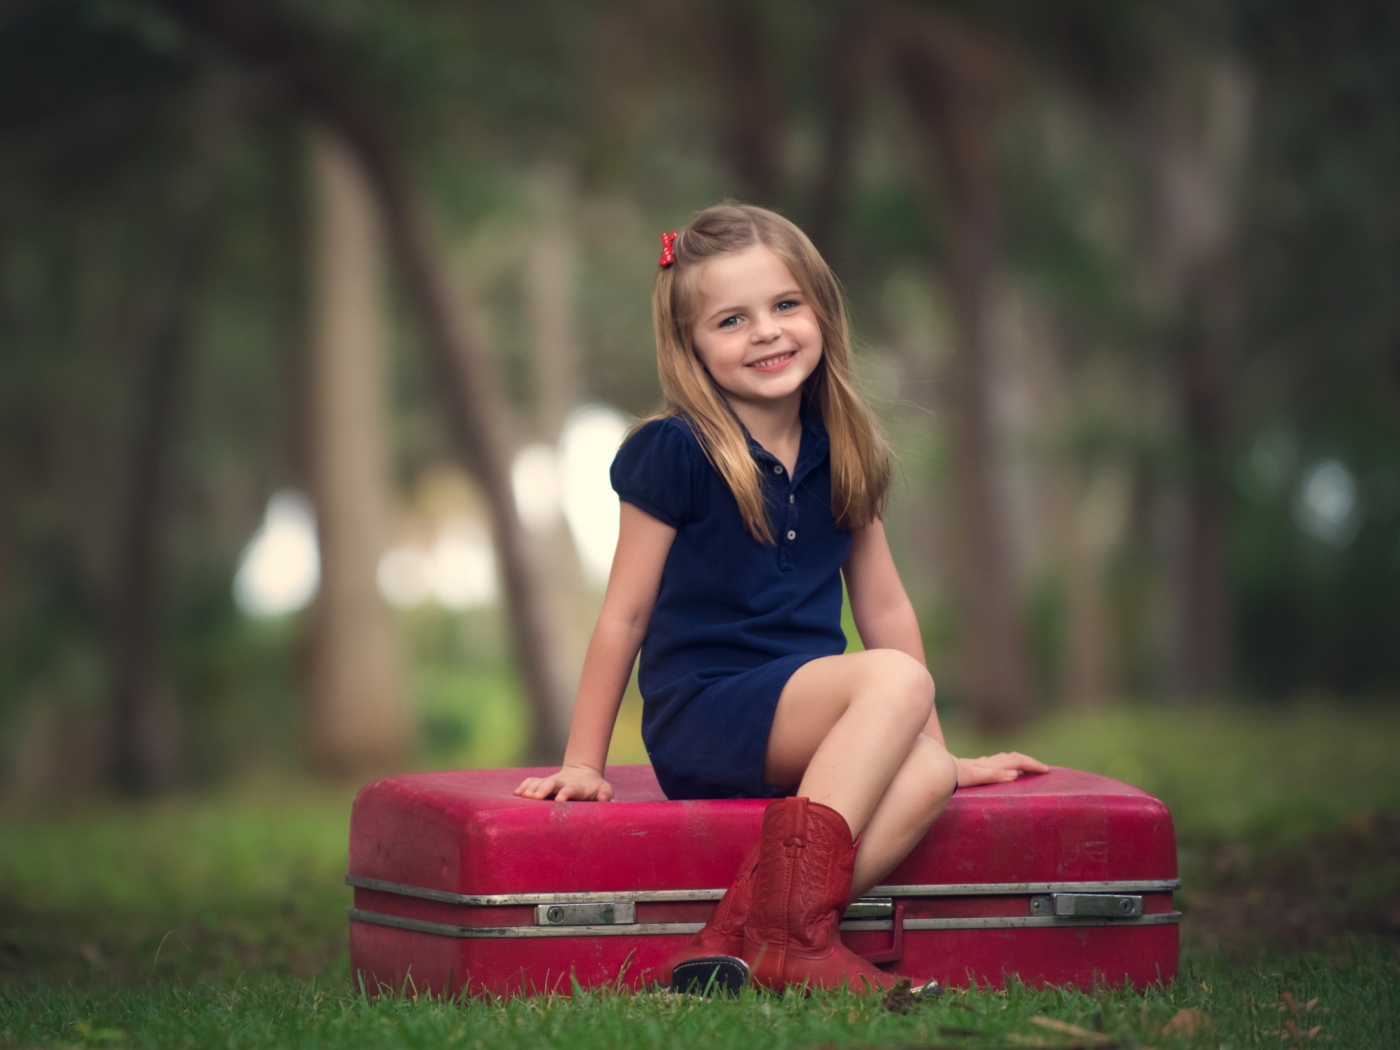 Das Little Girl Sitting On Red Suitcase Wallpaper 1400x1050